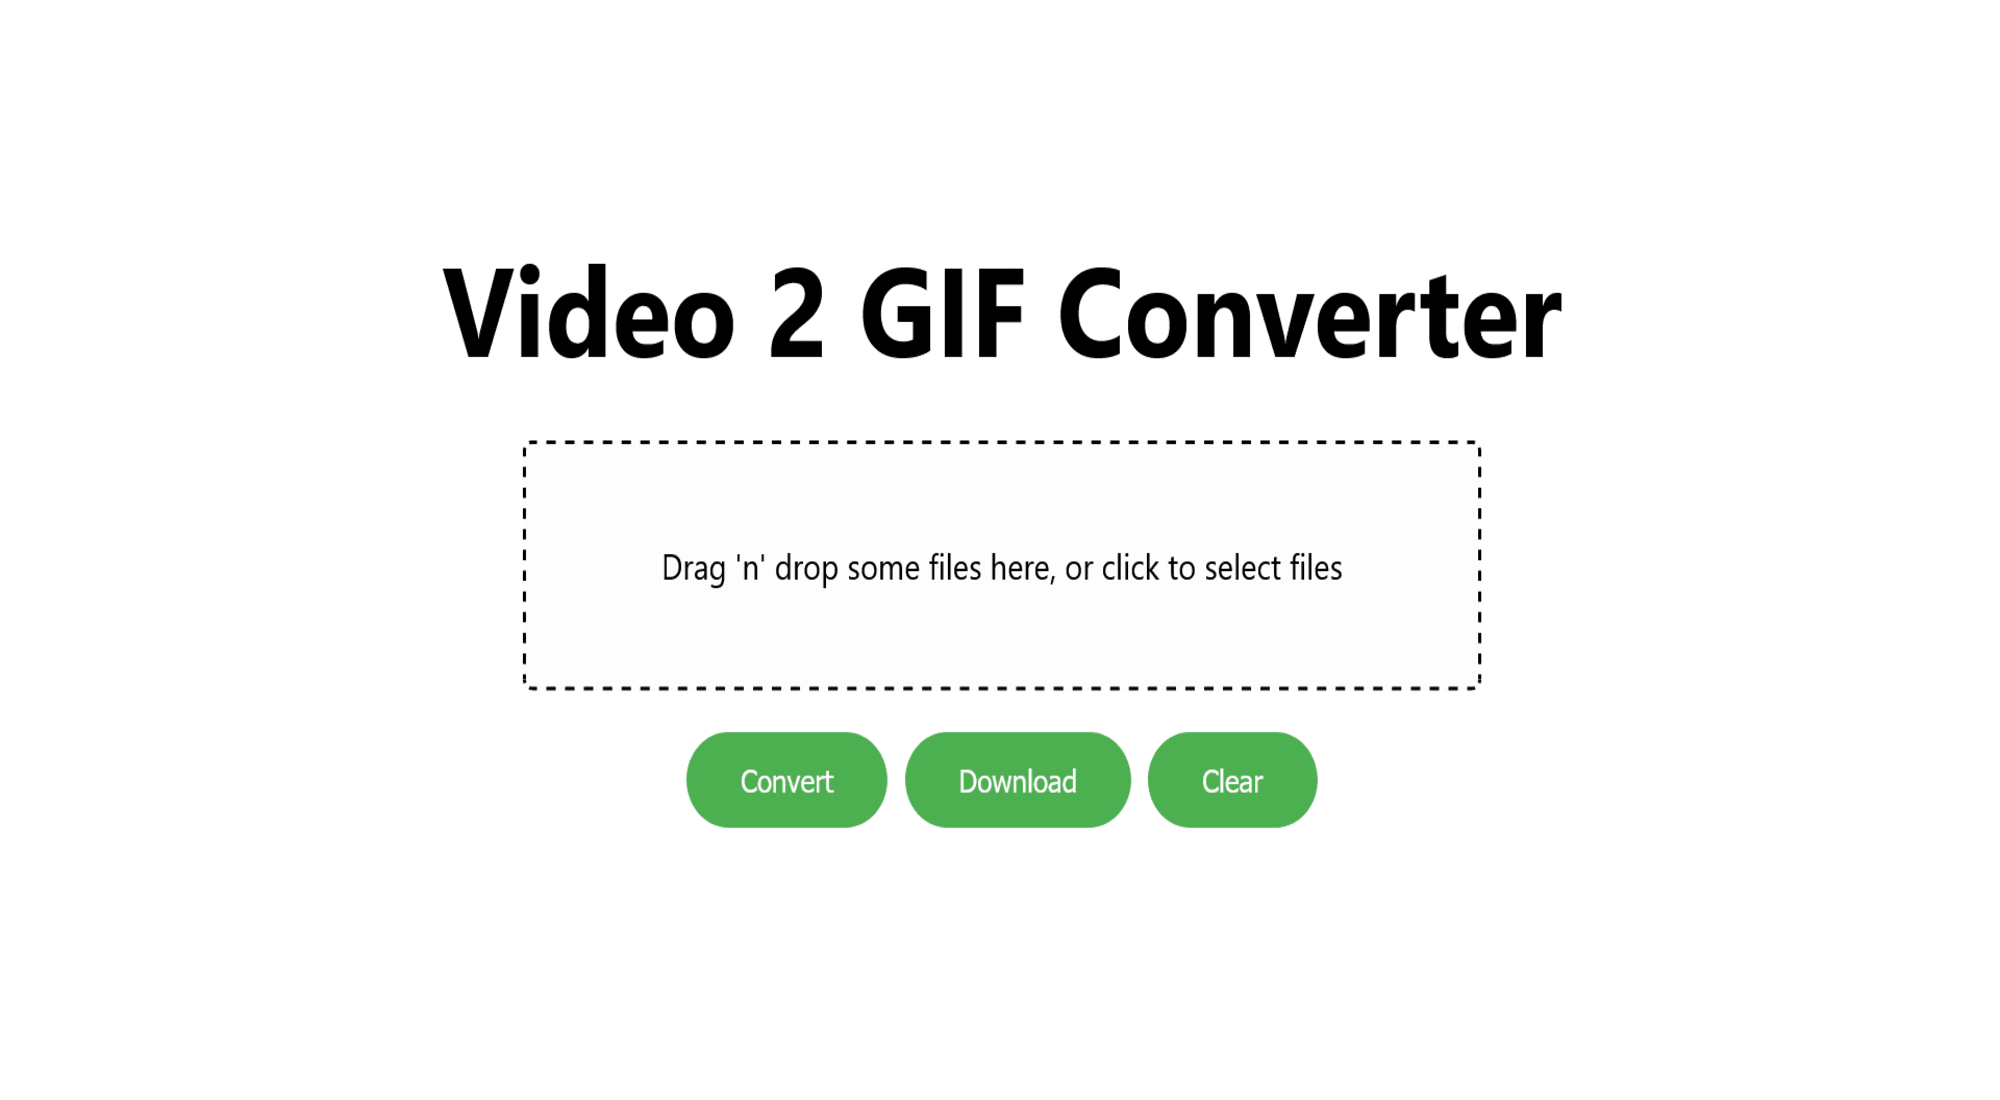 How To Convert Video to GIF in Next.js